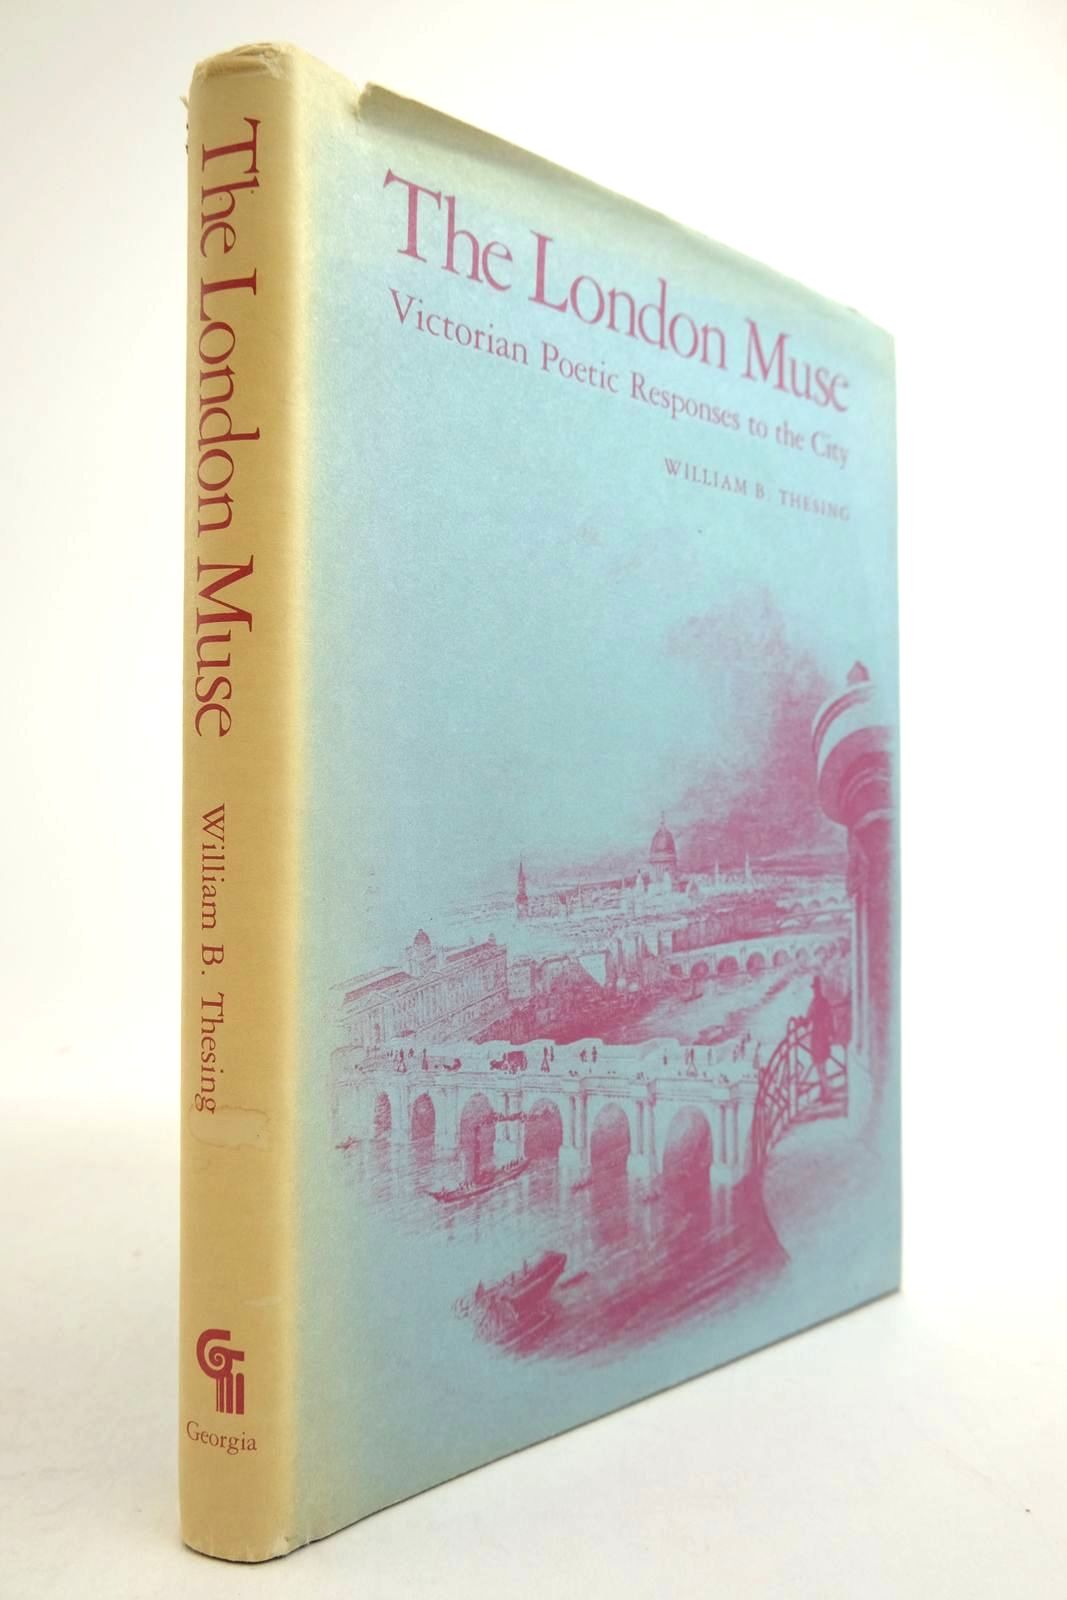 Photo of THE LONDON MUSE VICTORIAN POETIC RESPONSES TO THE CITY- Stock Number: 2134290